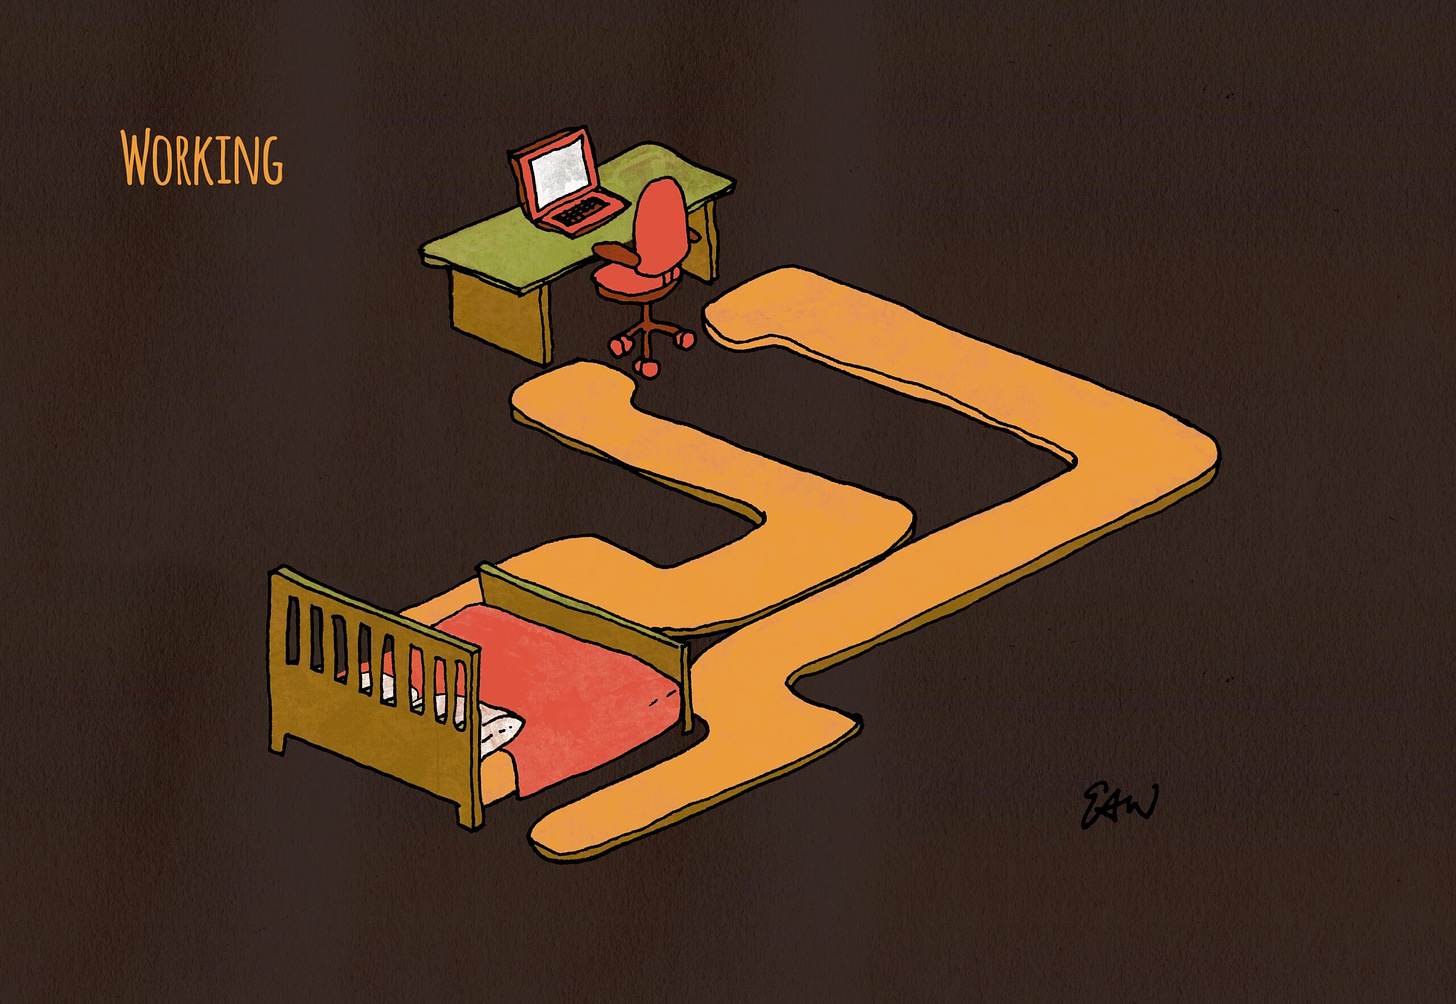 Drawing in an isometric grid perspective showing a path connecting a bed and a workstation, with a returning path back to the bed. The caption reads, "Working."